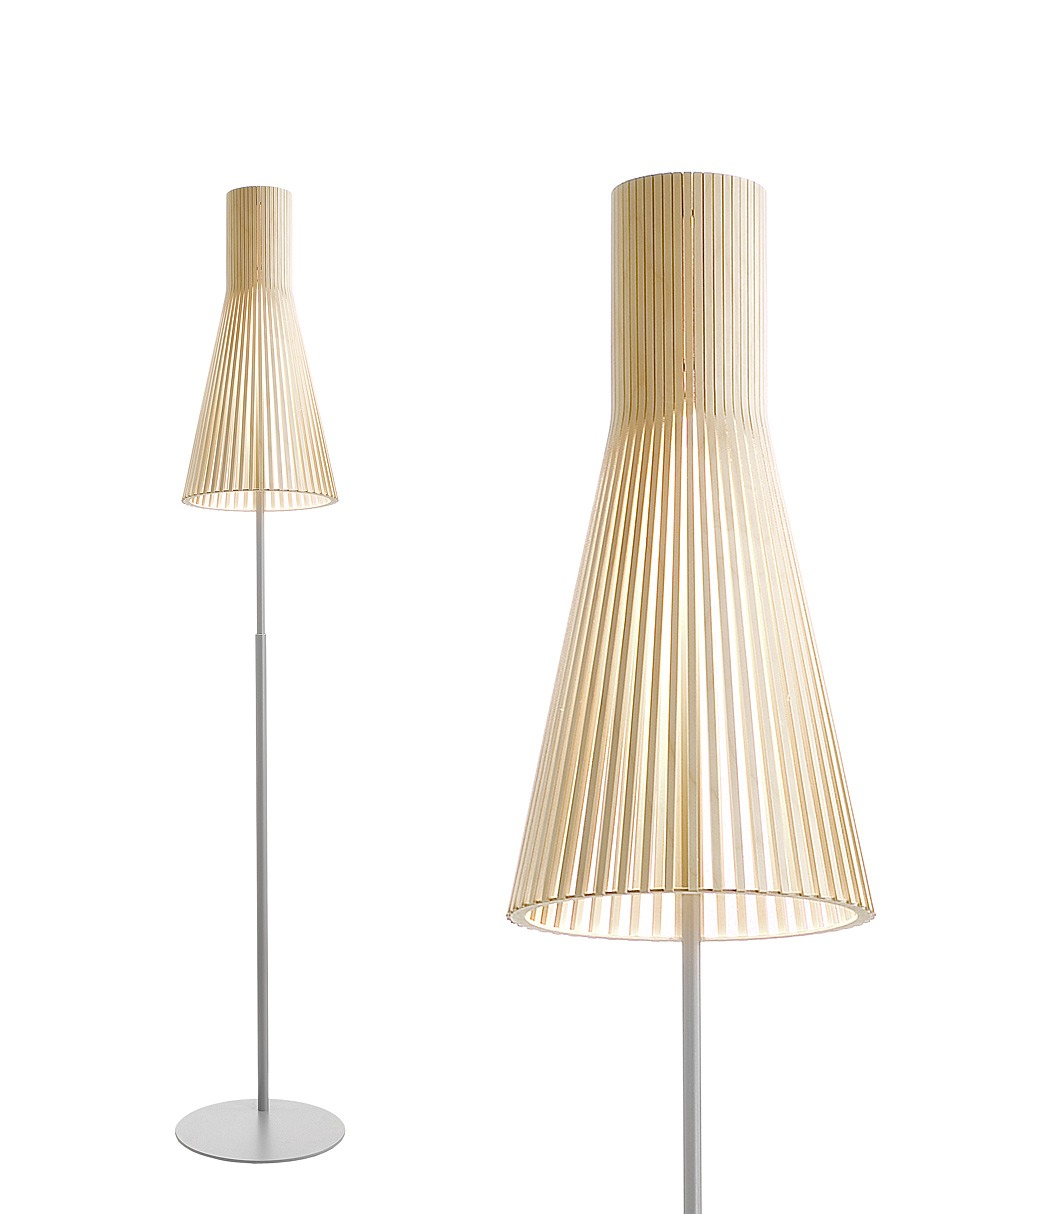 Secto 4210 Wooden Modern Floor Lamp Secto Design Secto Design for size 1060 X 1214